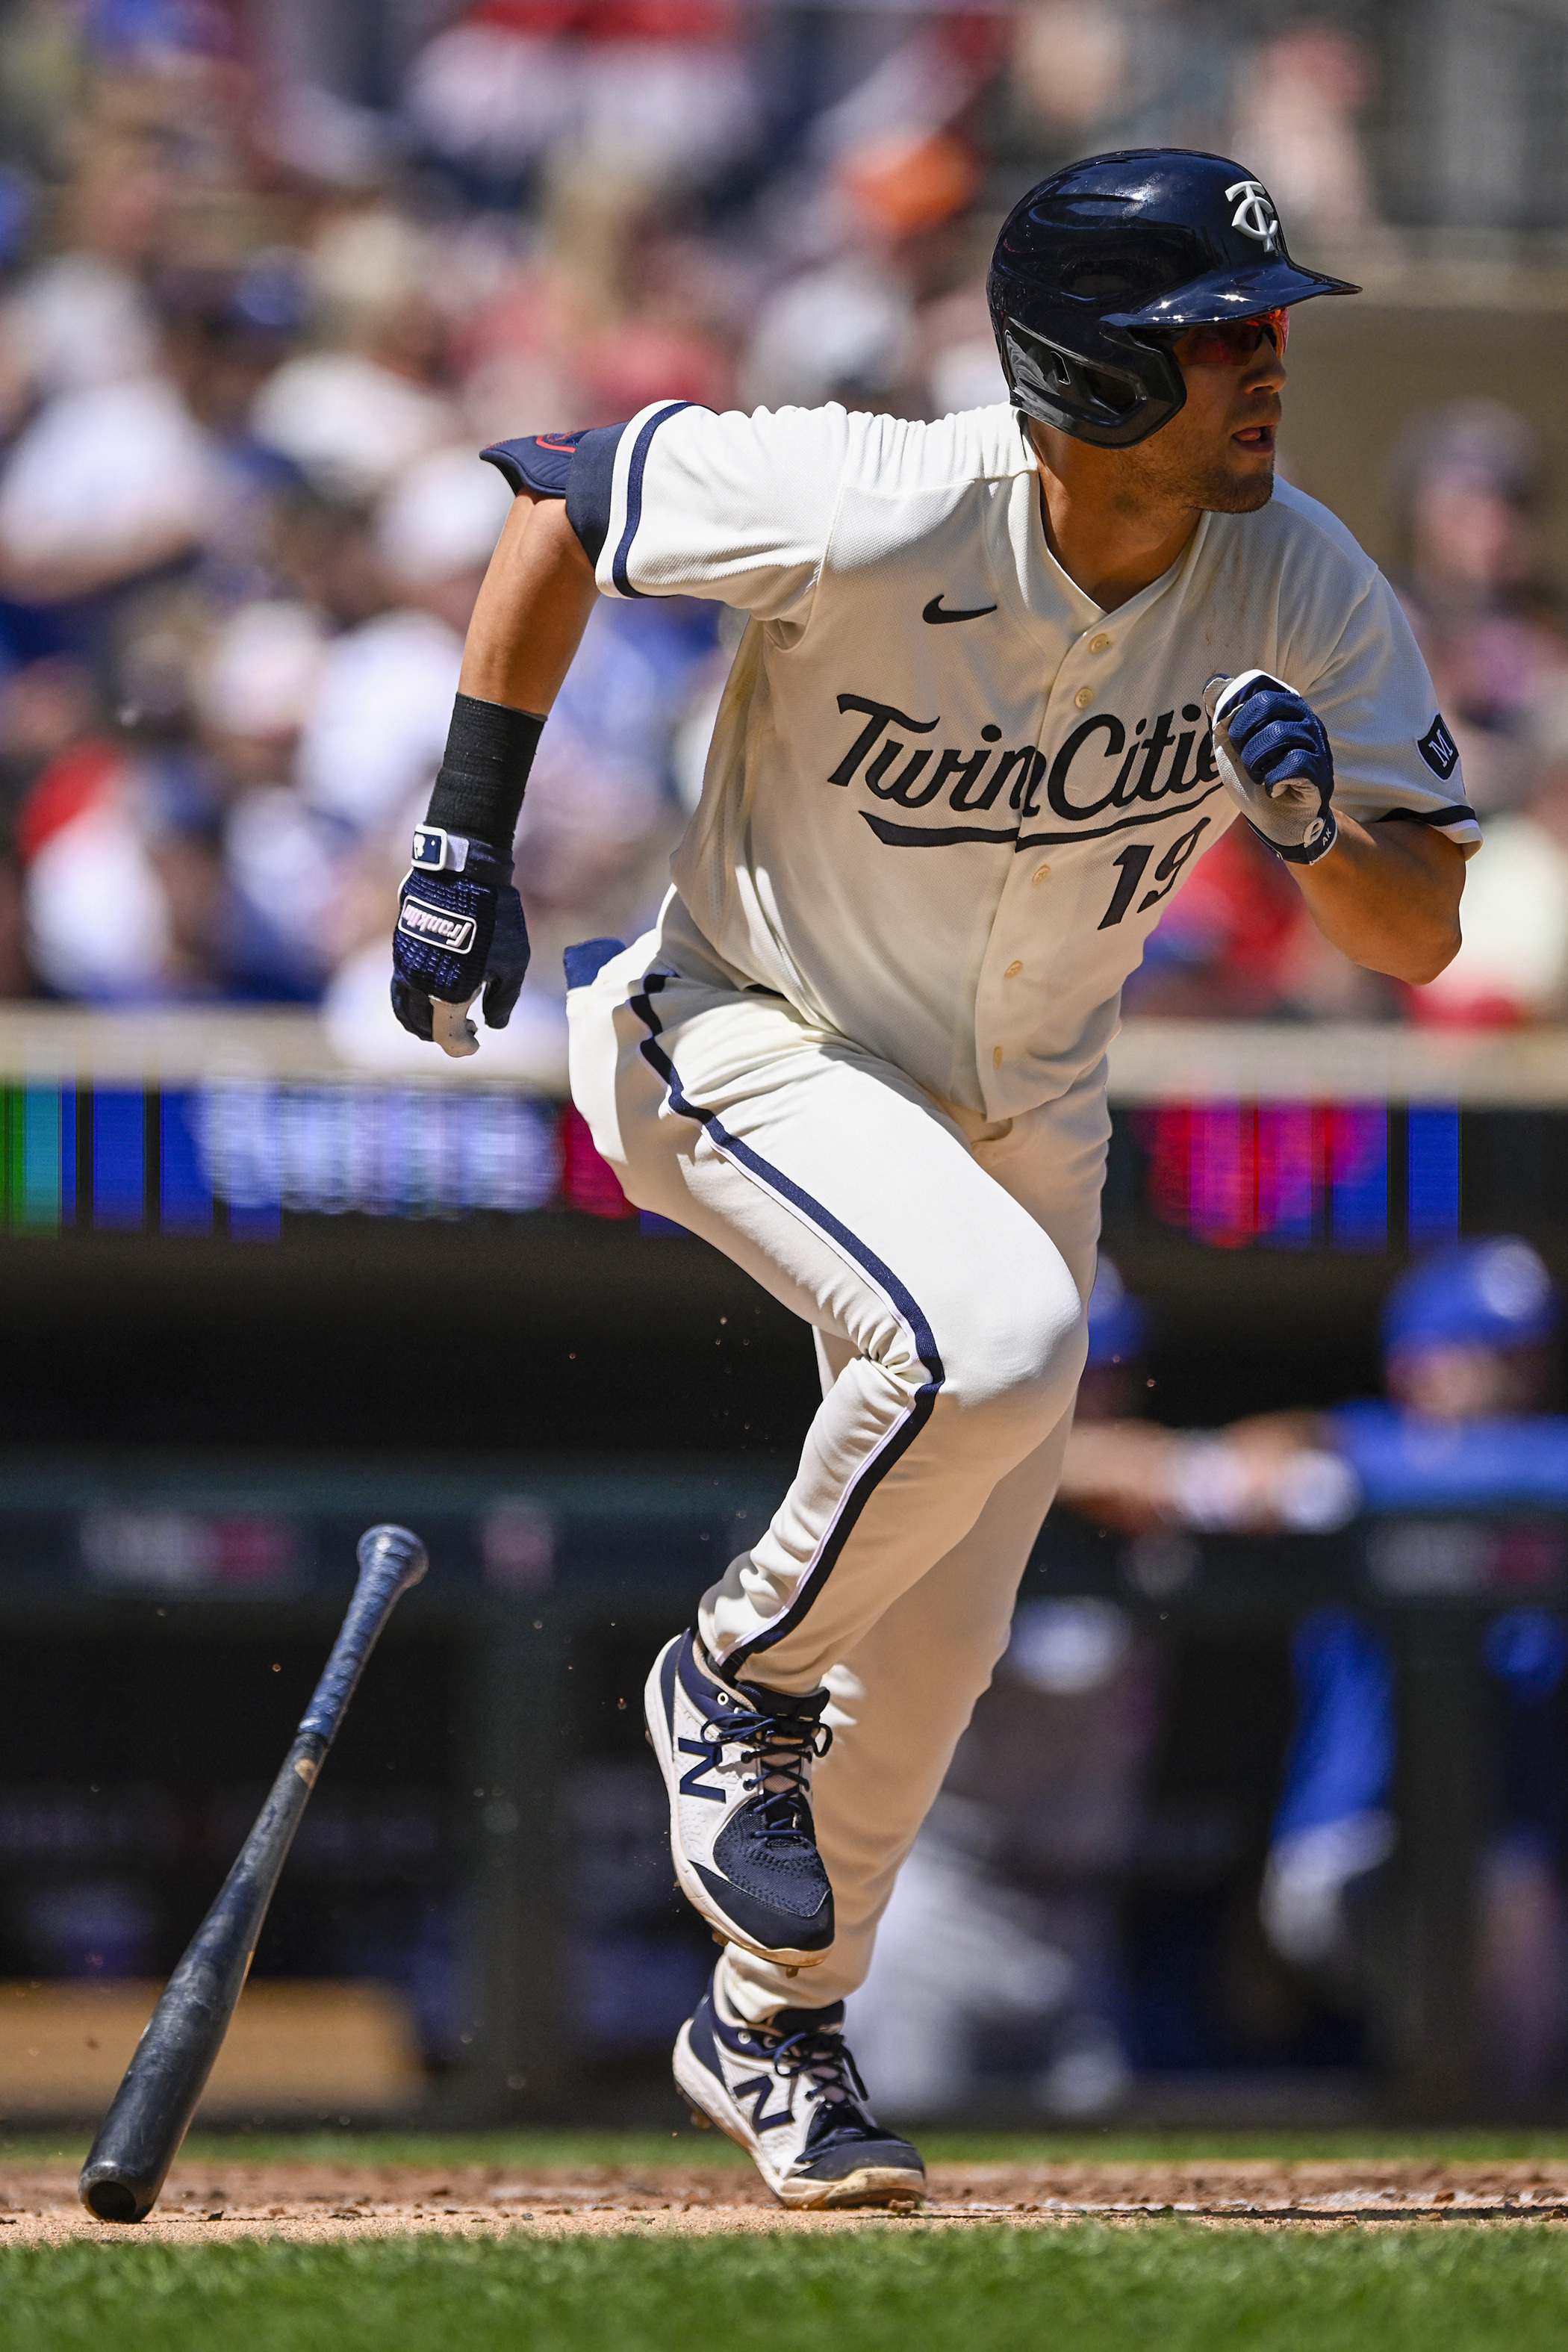 Willi Castro homers twice to propel Twins past Blue Jays